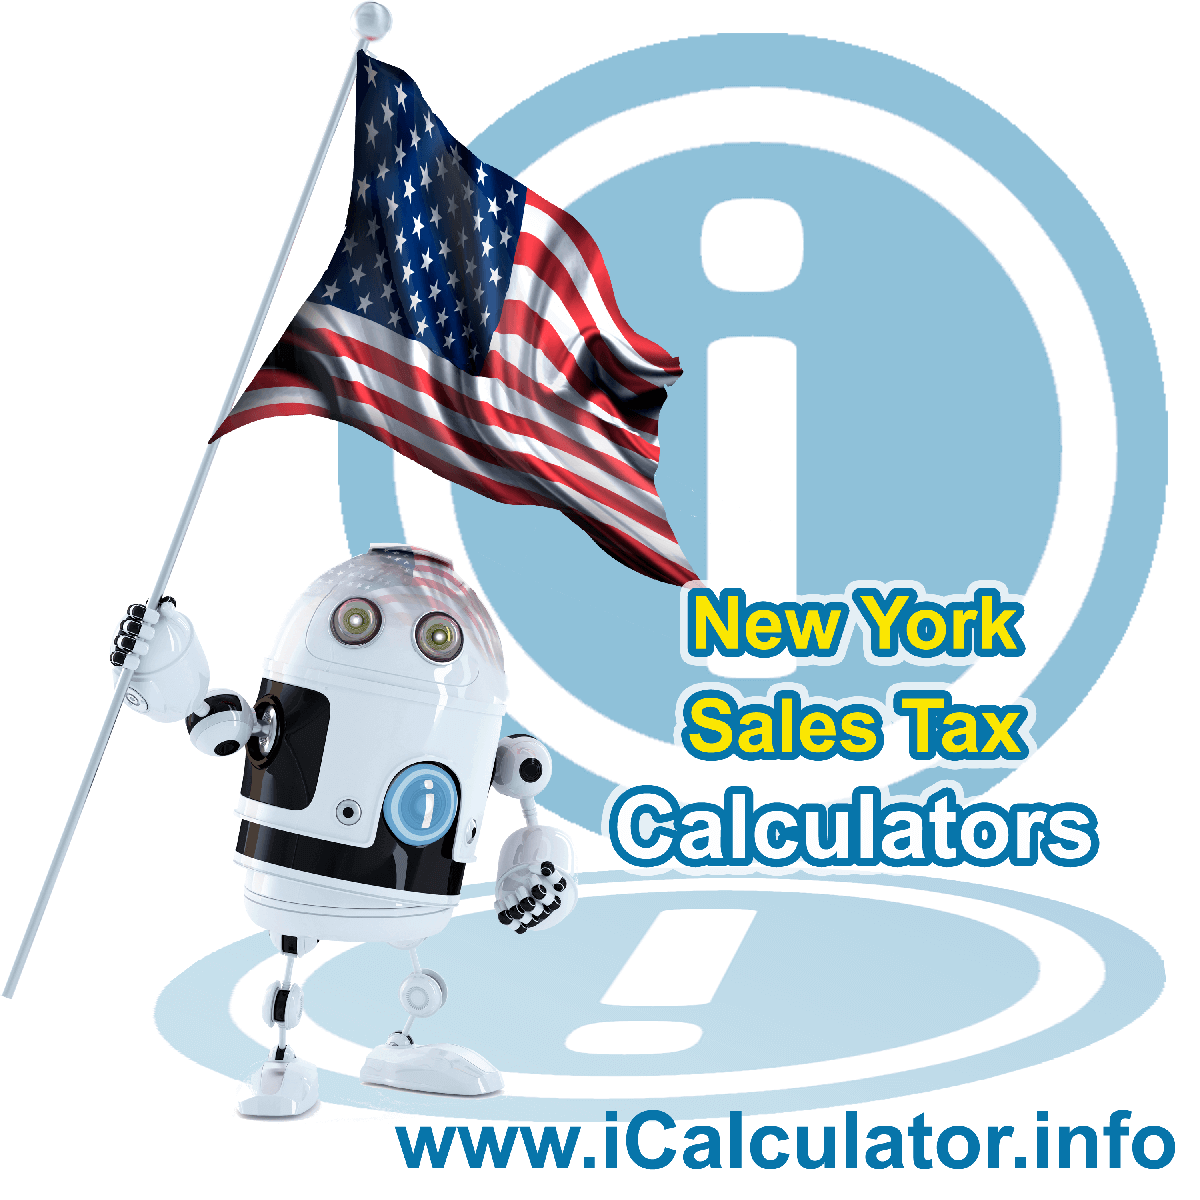 Cortland County, New York Sales Tax Comparison Calculator: This image illustrates a calculator robot comparing sales tax in Cortland County, New York manually using the Cortland County, New York Sales Tax Formula. You can use this information to compare Sales Tax manually or use the Cortland County, New York Sales Tax Comparison Calculator to calculate and compare Cortland County, New York sales tax online.